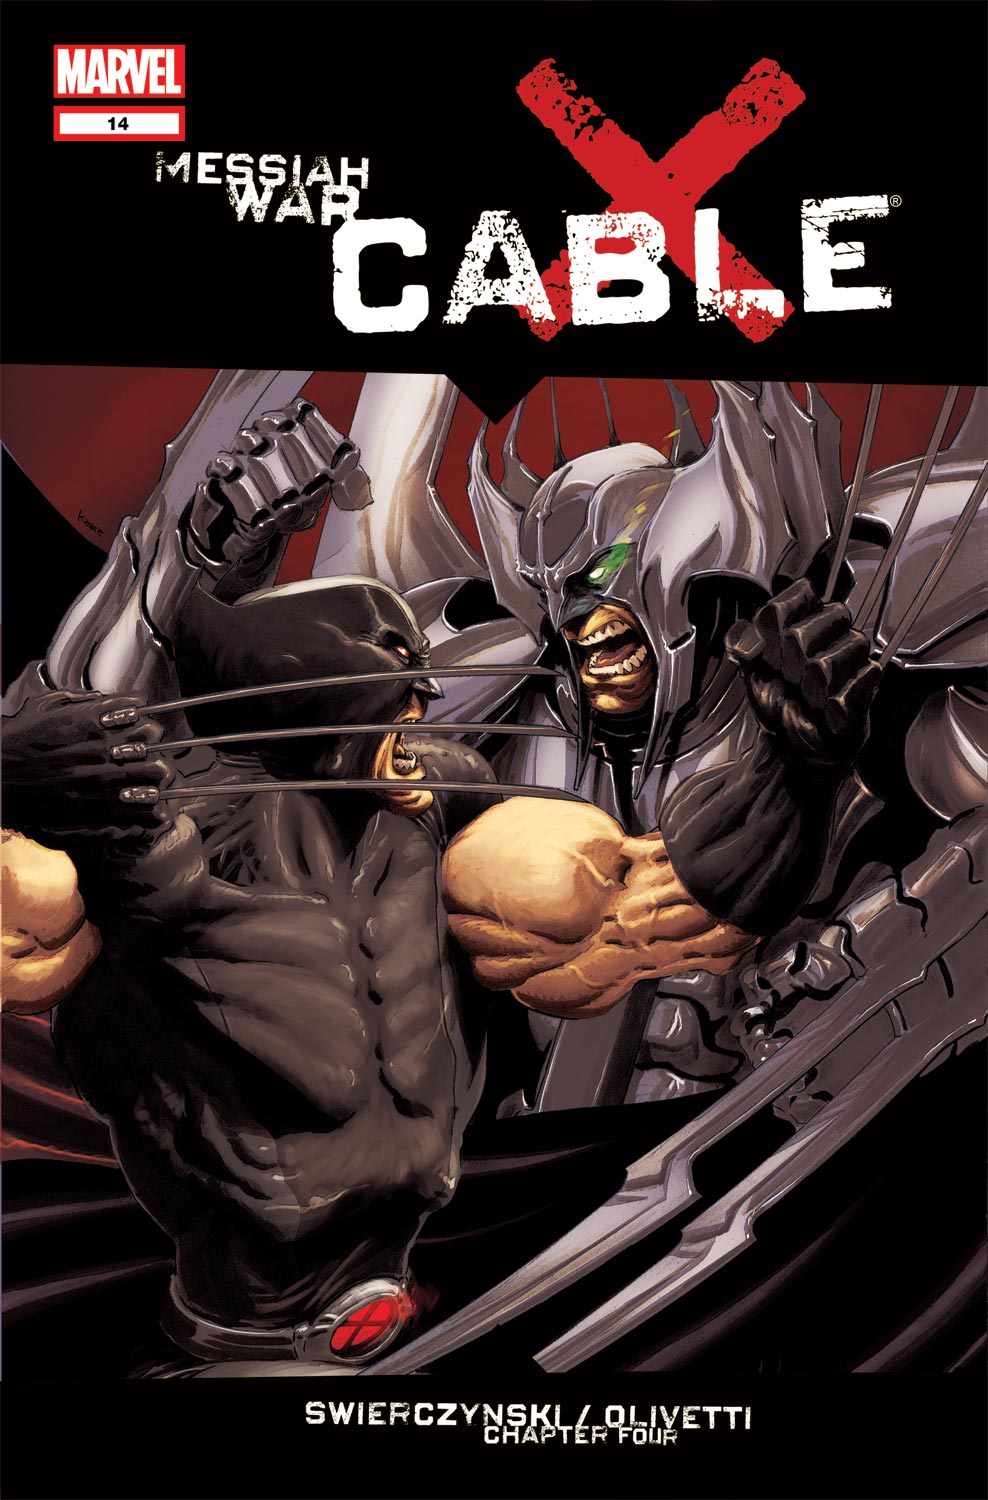 Cable (2008) #14